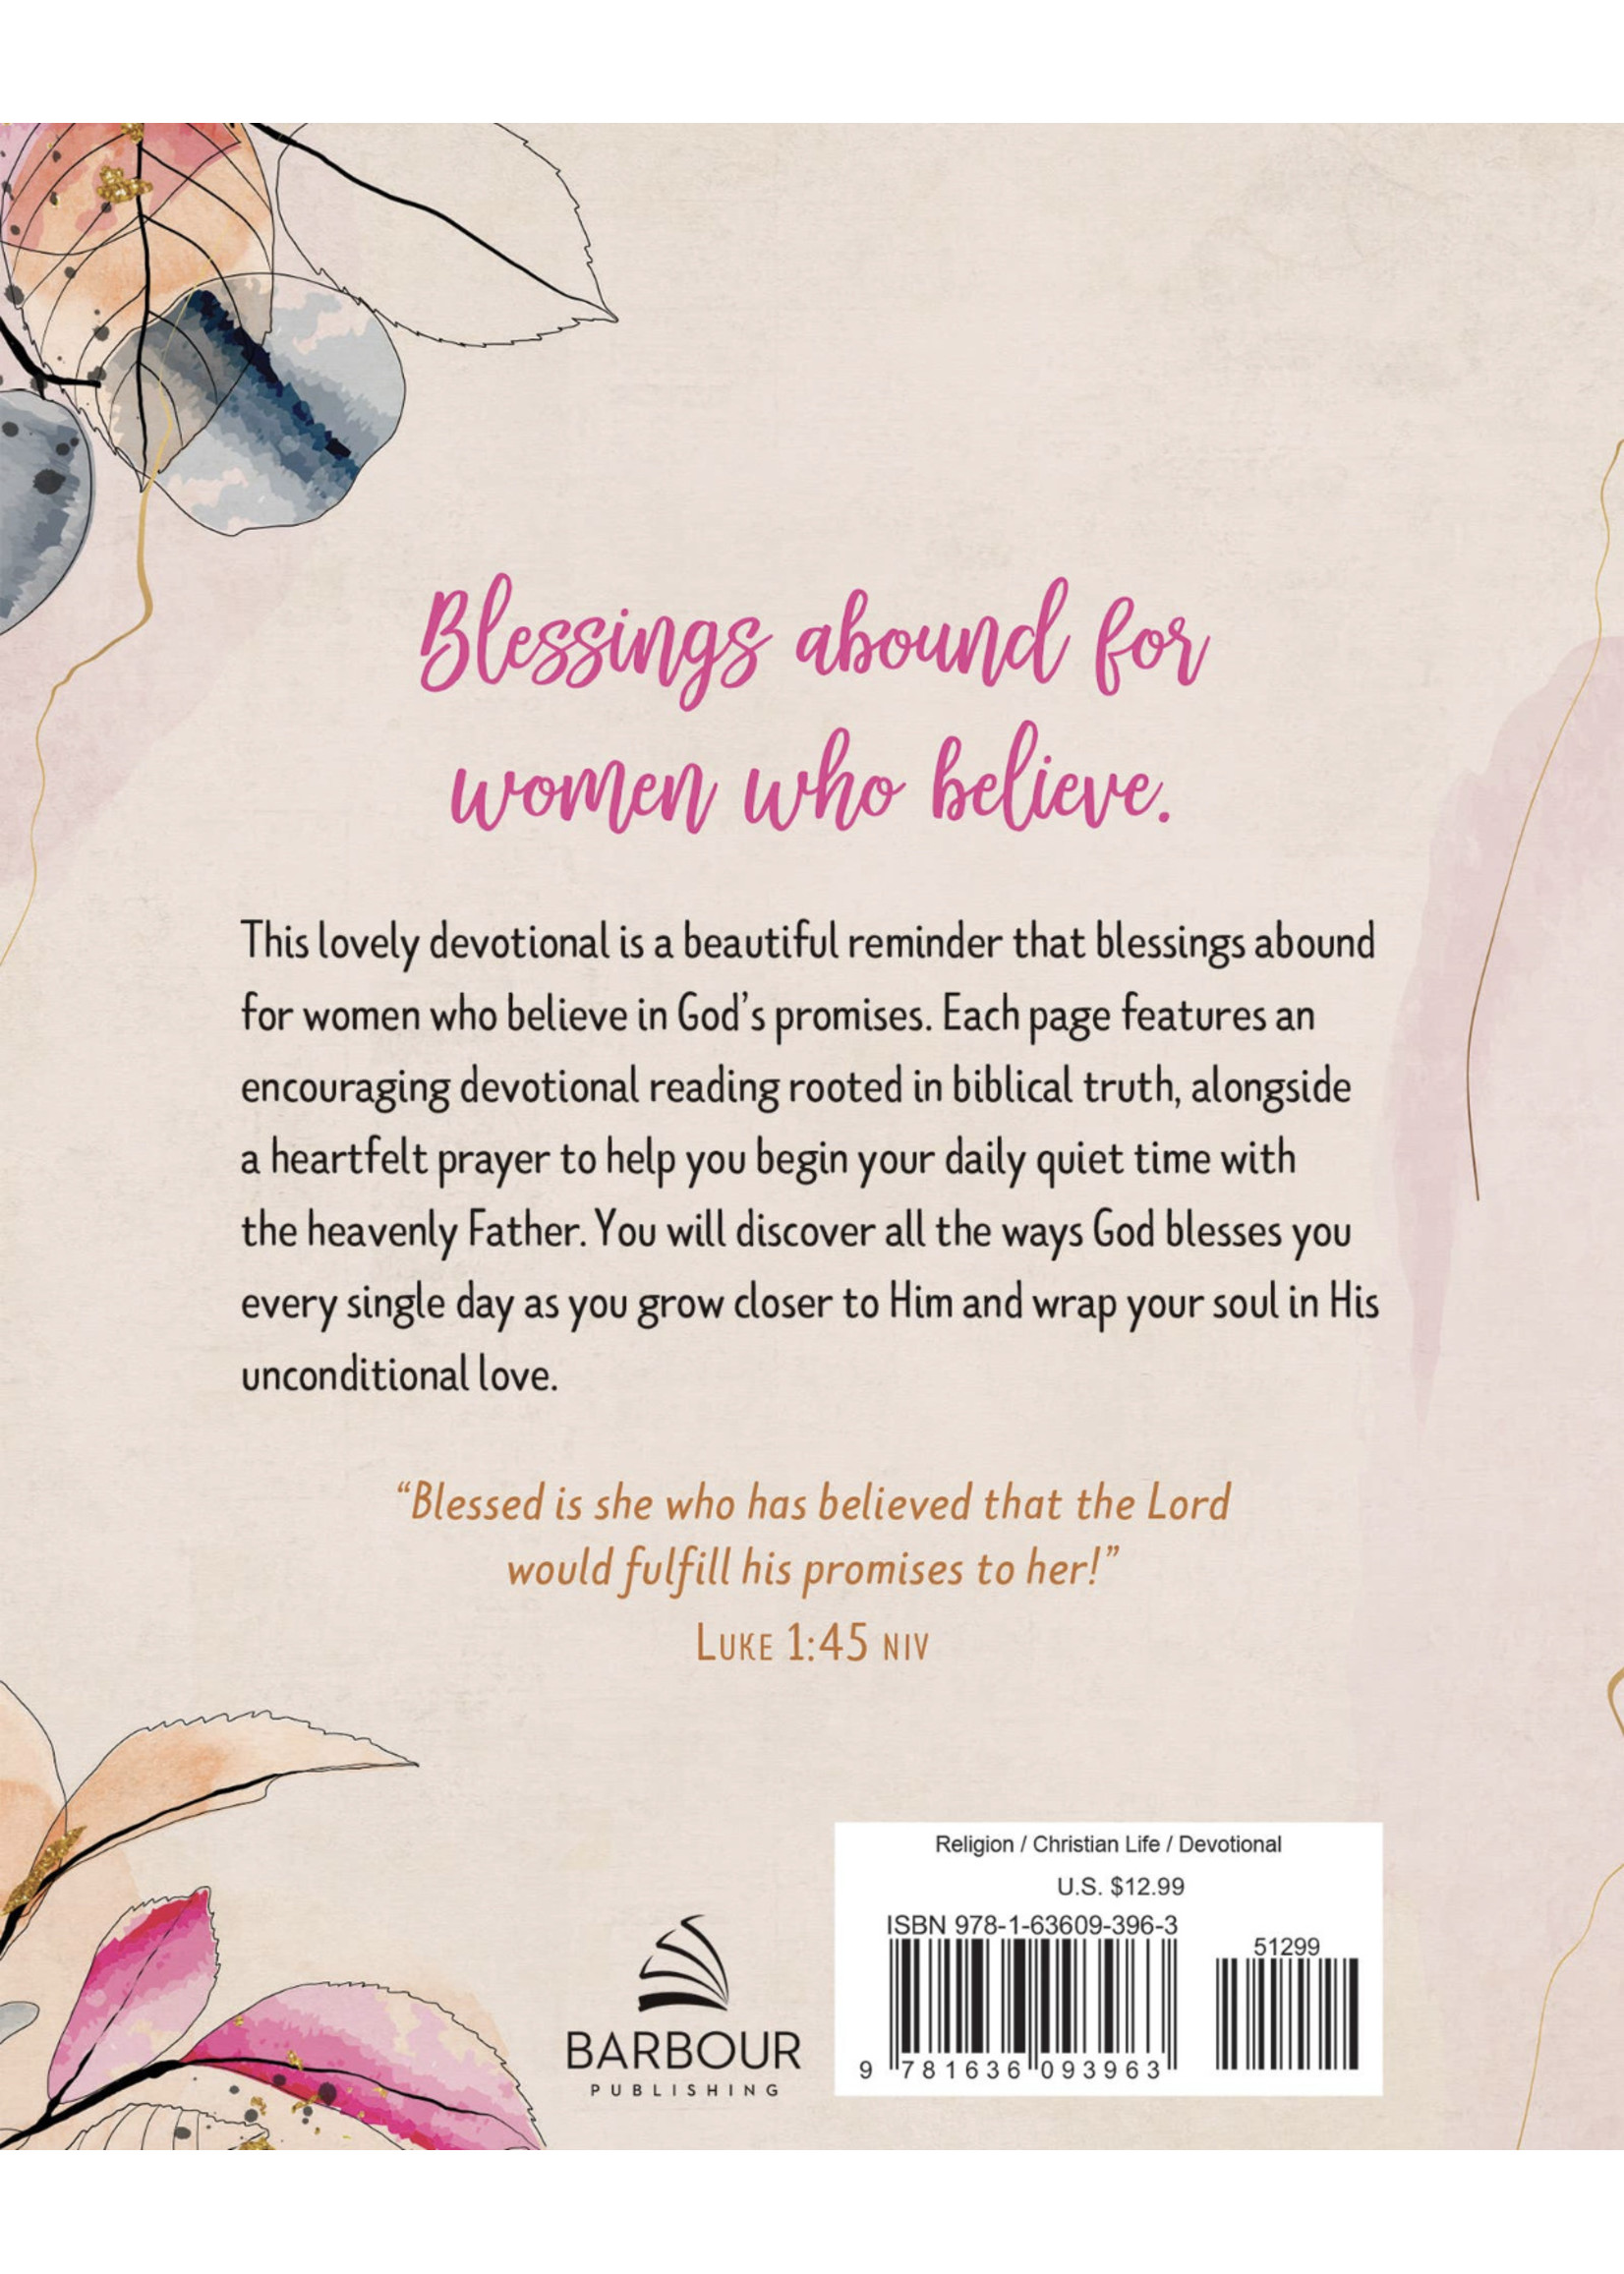 Barbour Publishing Blessed is She Who Believes